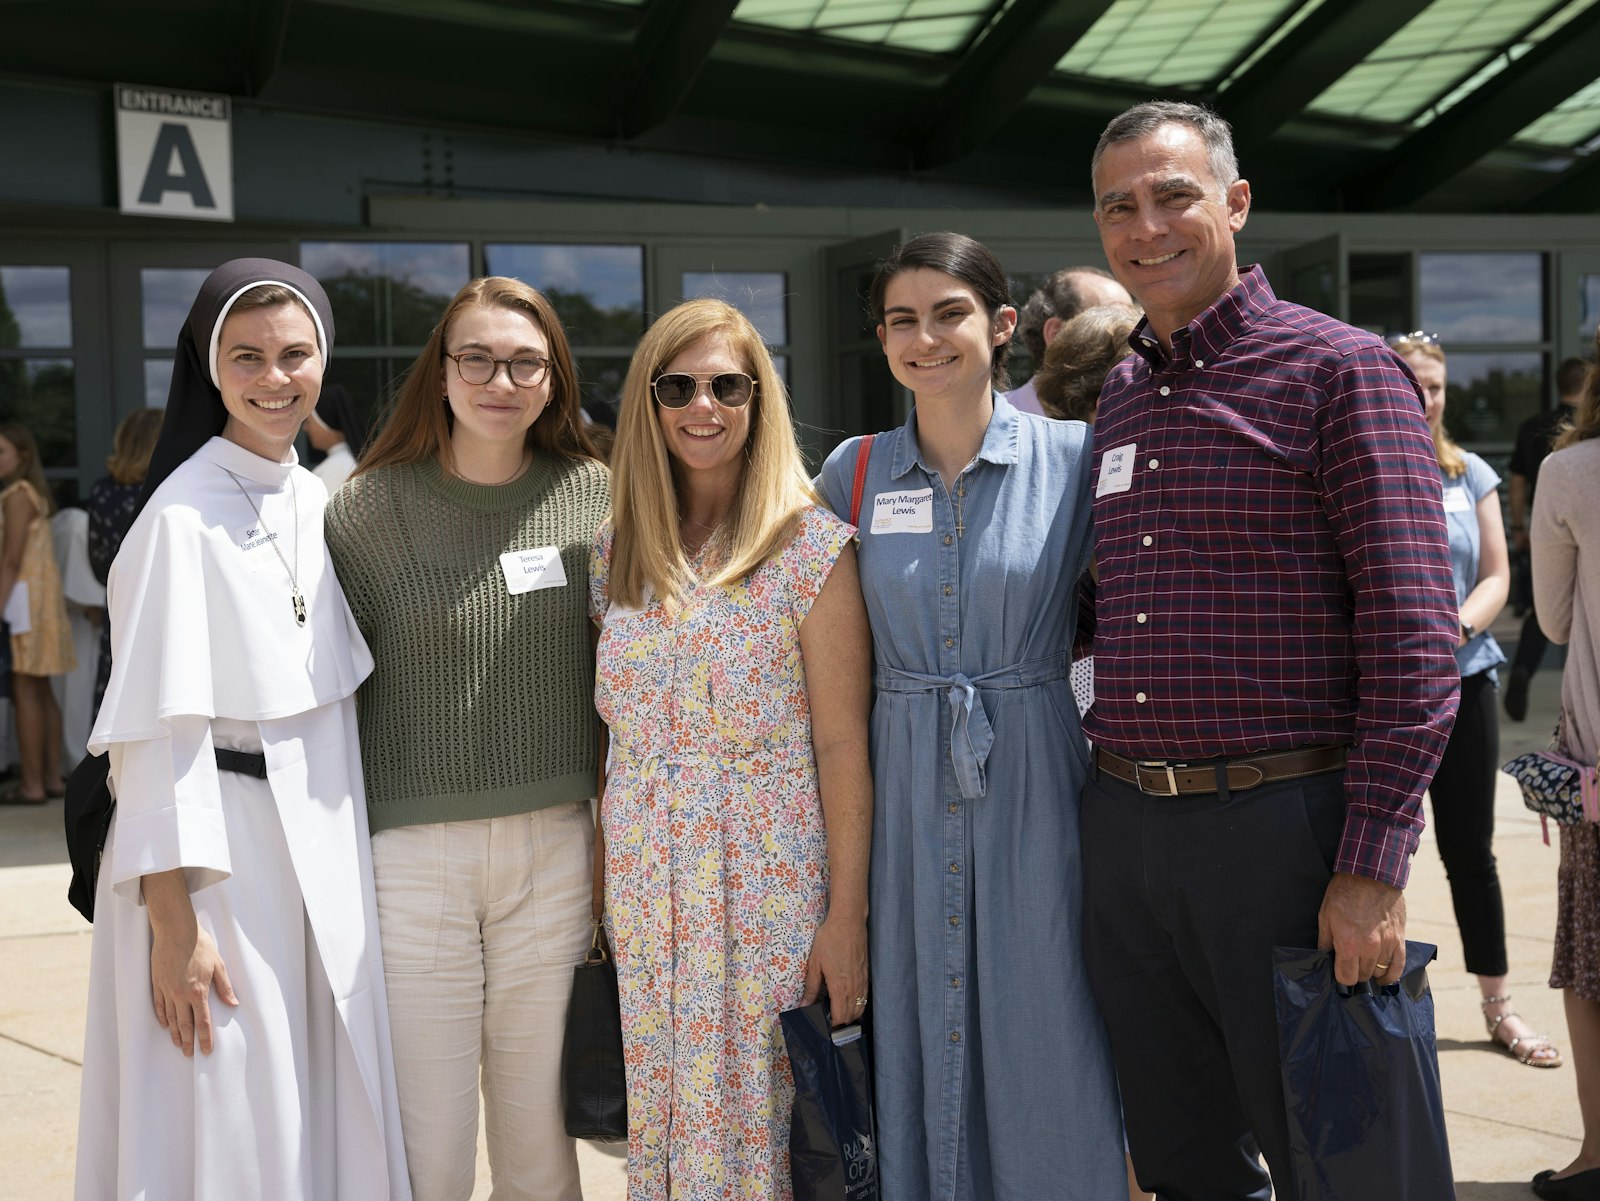 Sr. Marie Jeanette, OP, is pictured with her parents Craig and Kathleen Lewis and two of her sisters. The Lewises traveled from North Carolina for the celebration.